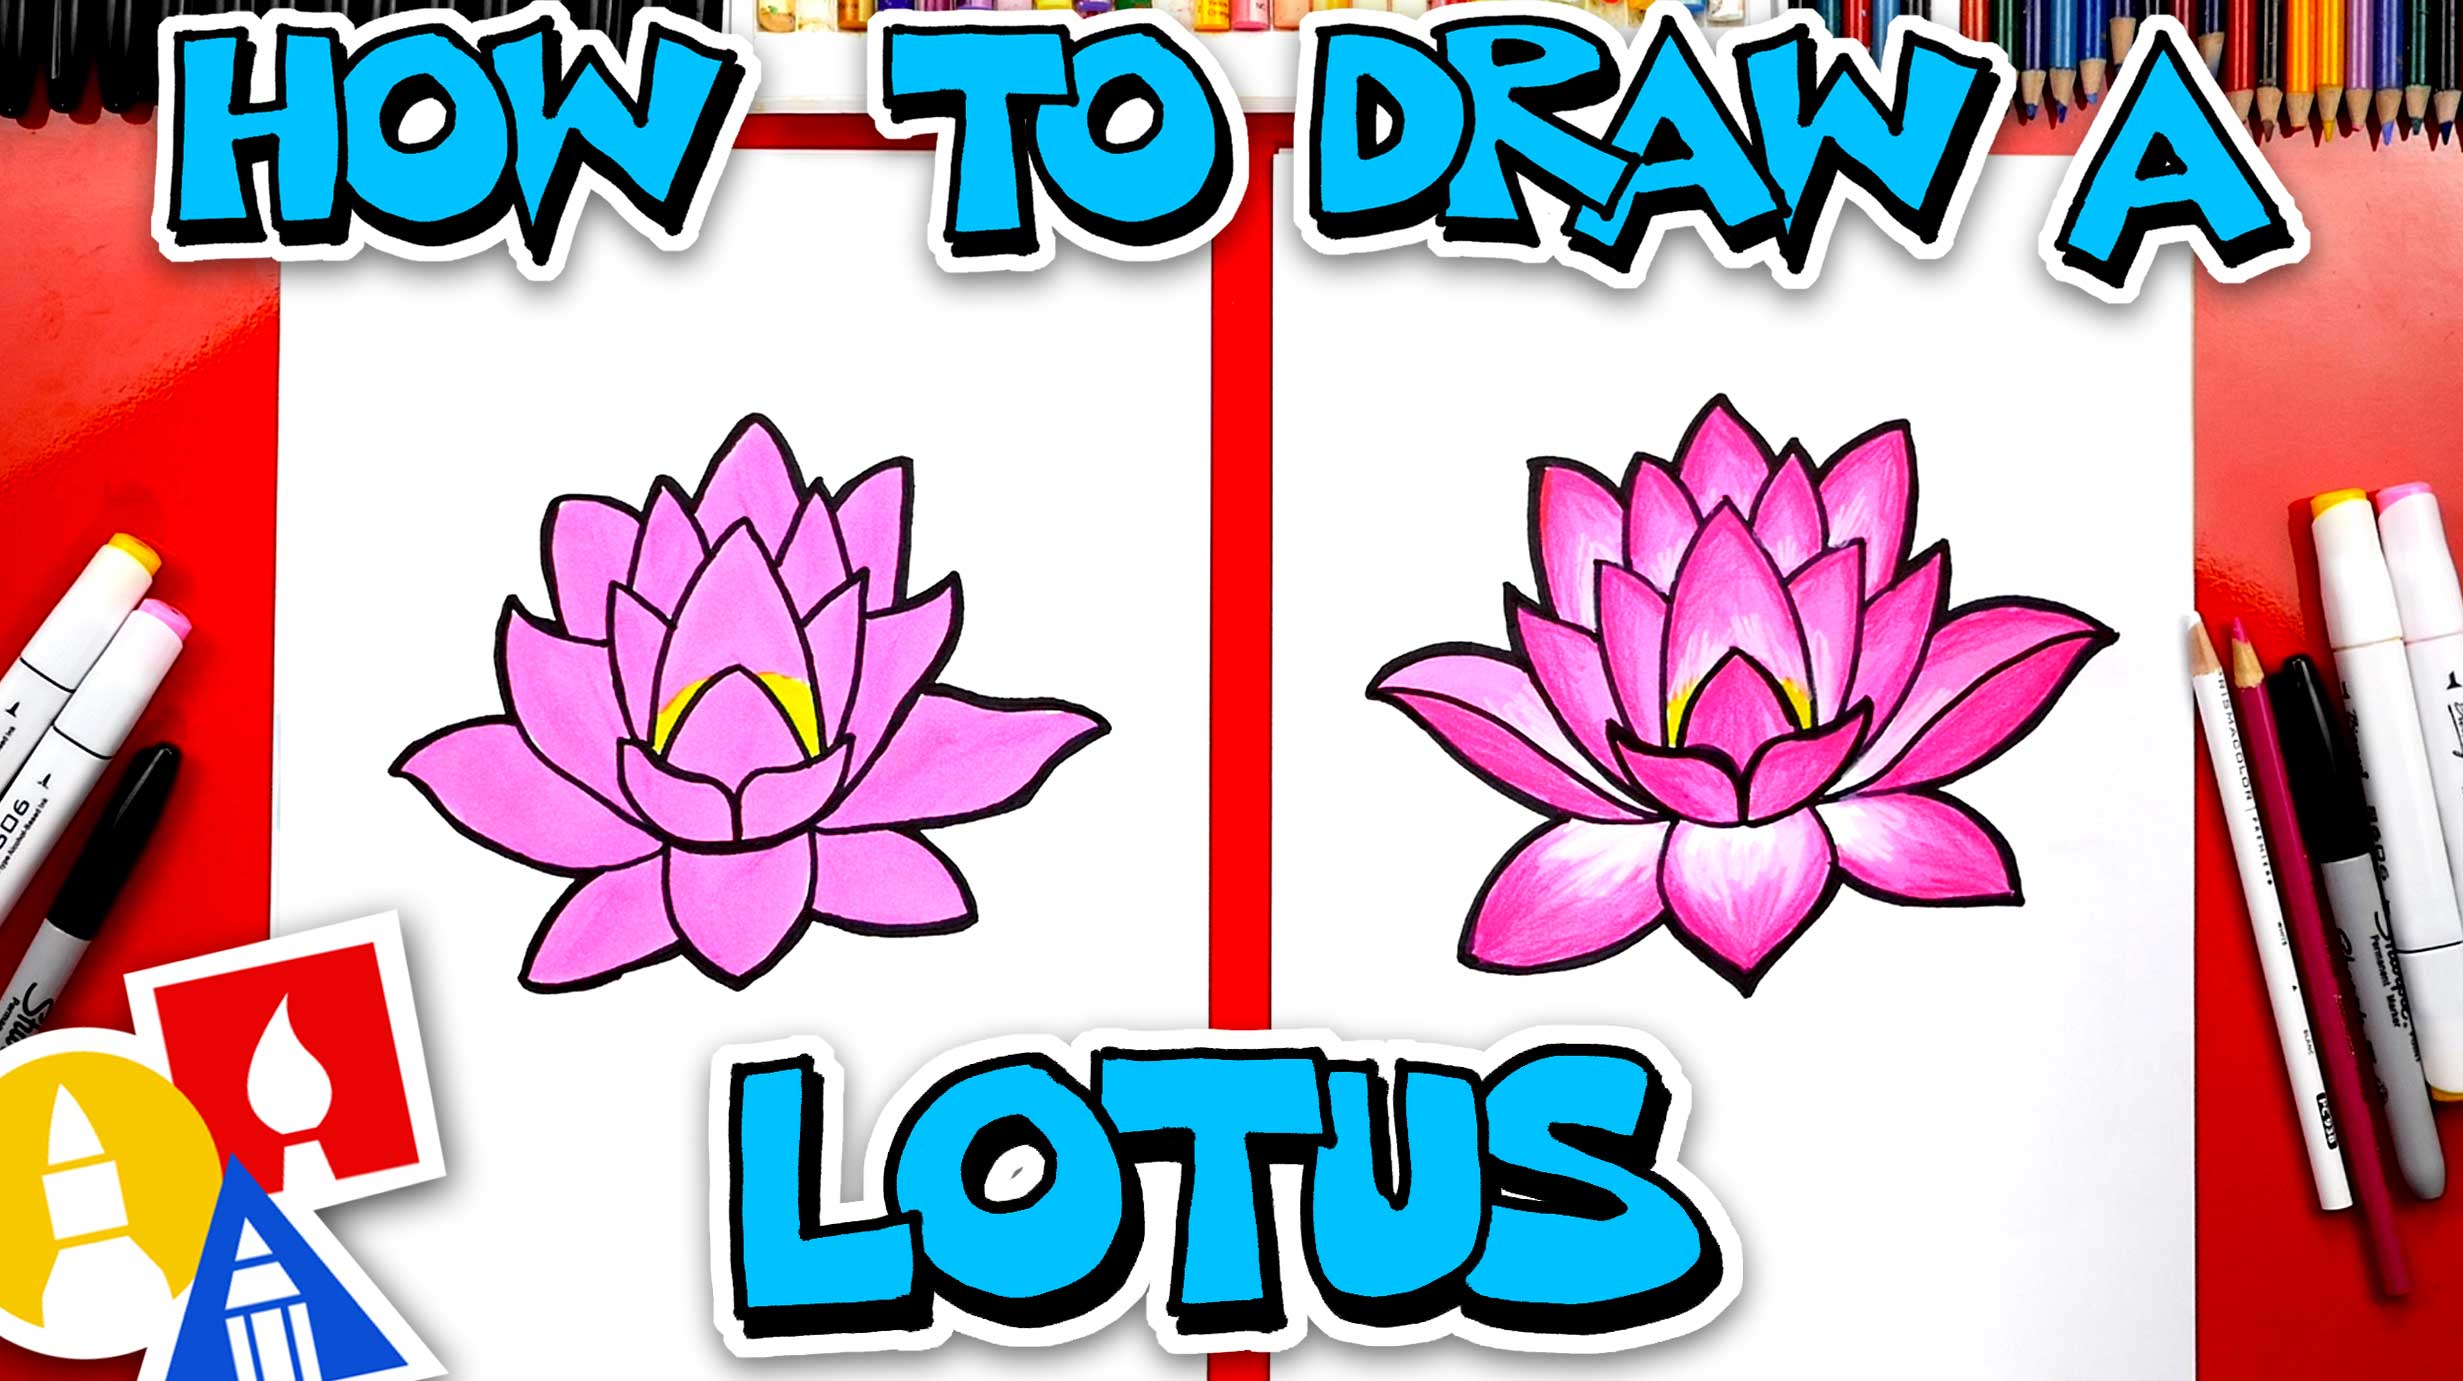 Lotus flower drawing Cut Out Stock Images & Pictures - Alamy-saigonsouth.com.vn